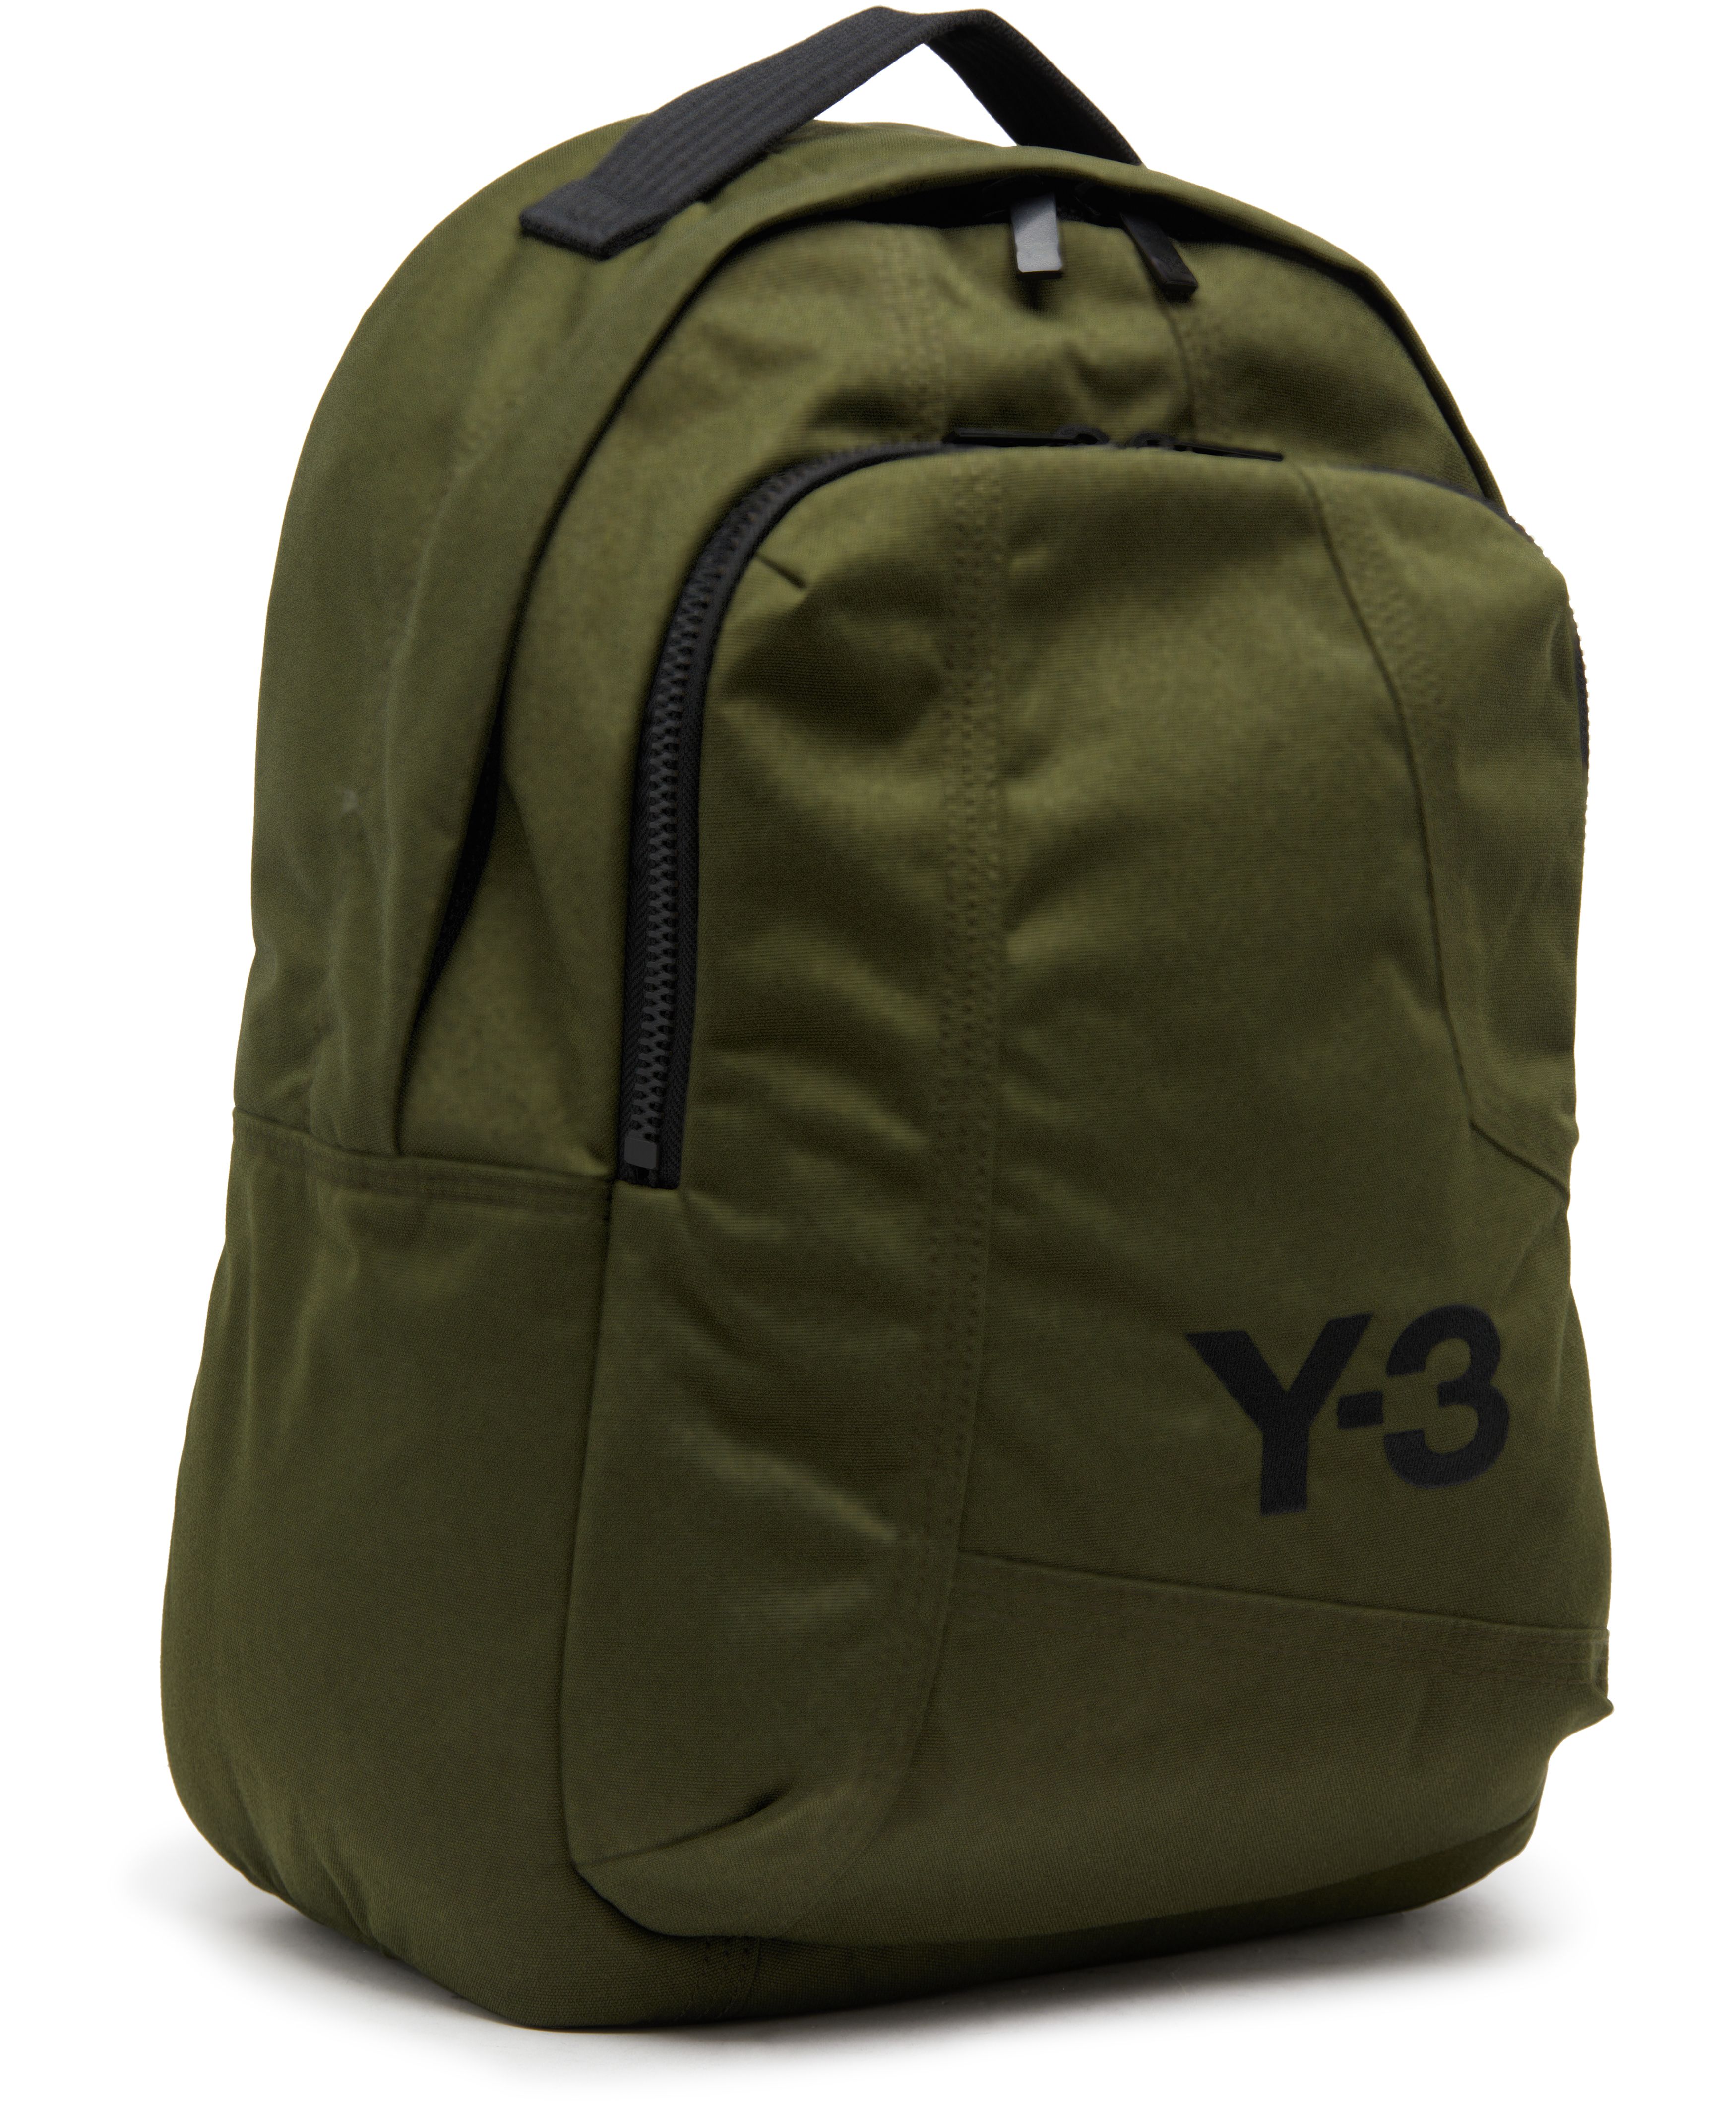  Y-3 Classic back pack